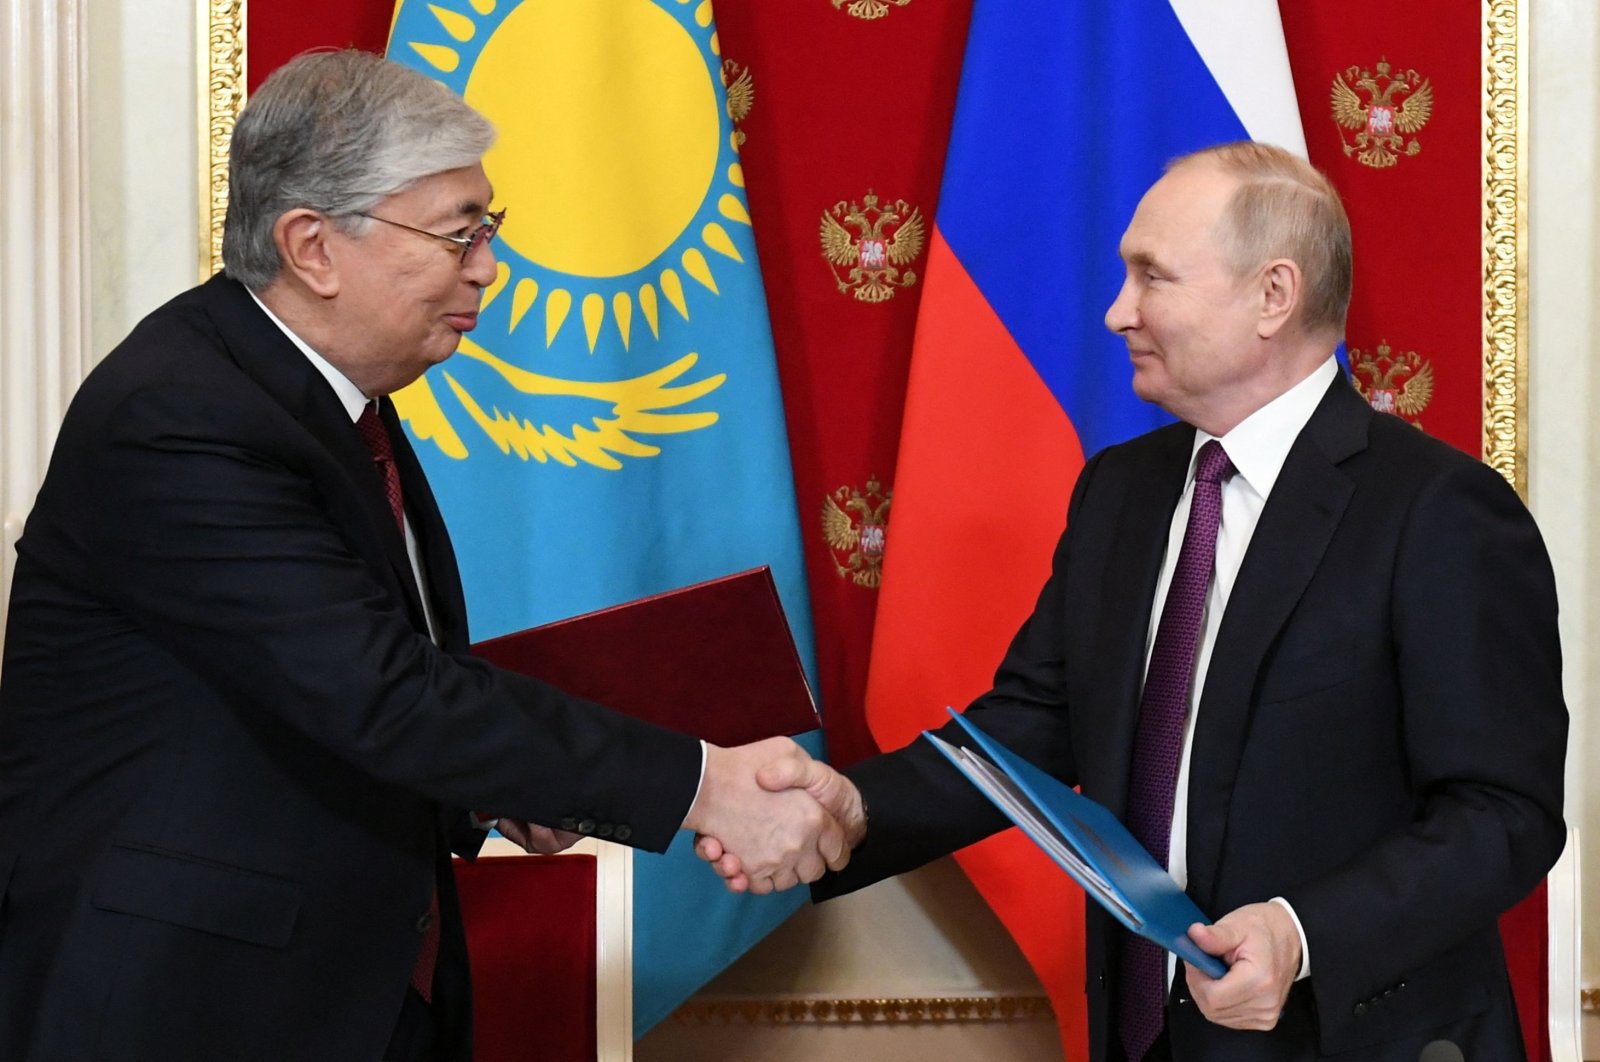 Russian President Vladimir Putin (R) shakes hands with his Kazakh counterpart Kassym-Jomart Tokayev (L) after a signing ceremony in the Kremlin in Moscow, Russia, Nov. 28, 2022. (AFP Photo)